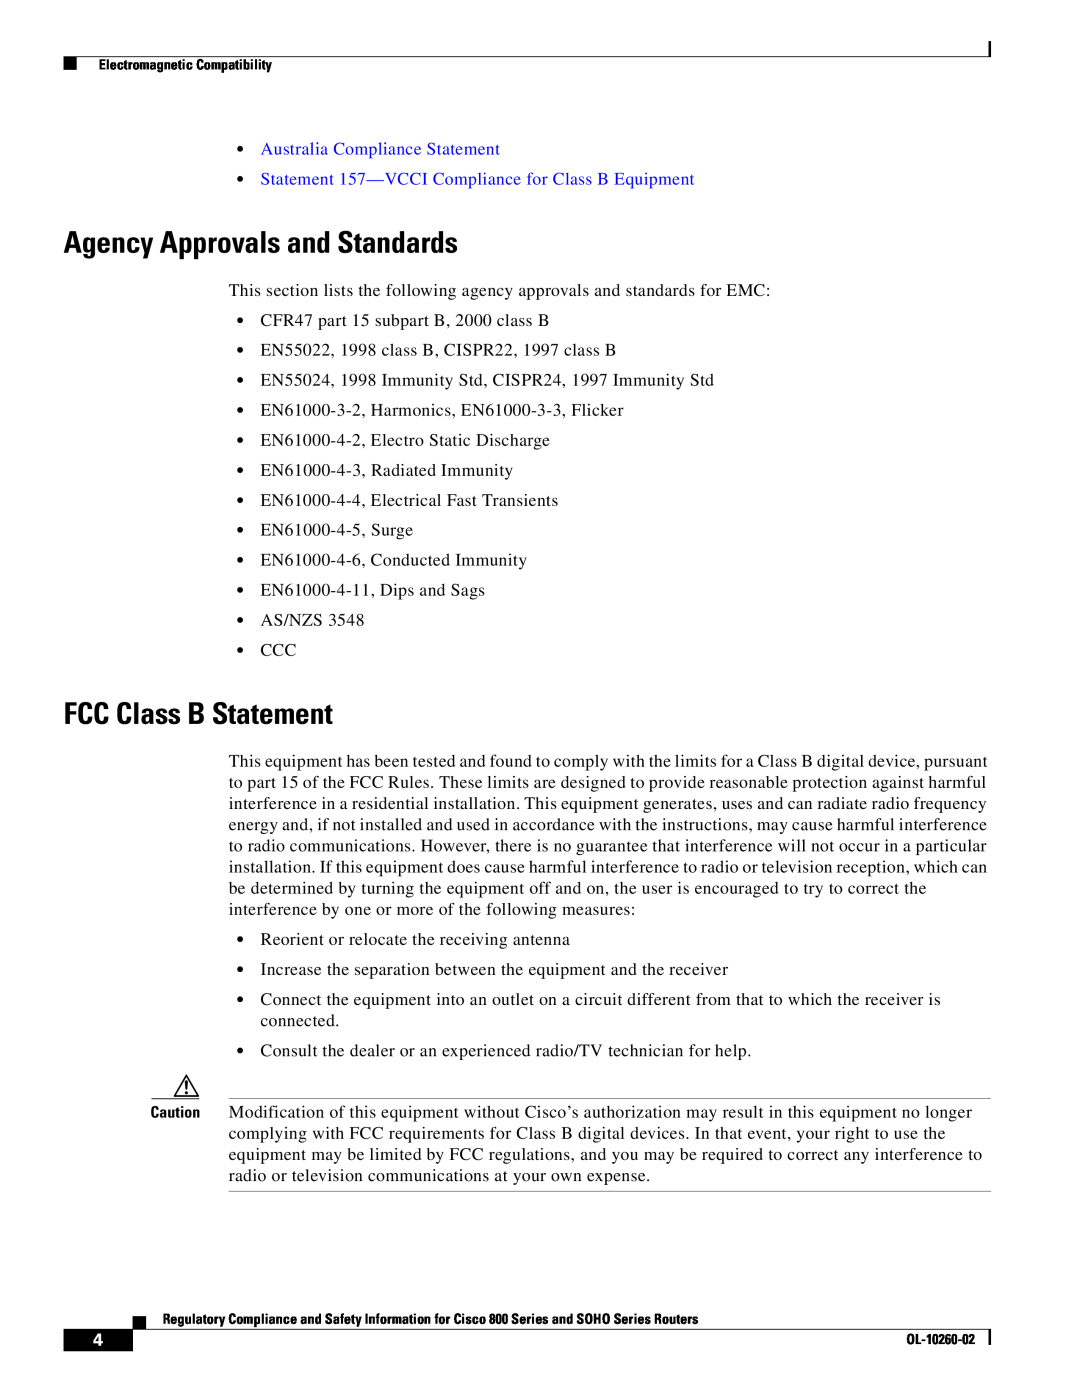 Cisco Systems SOHO Series manual FCC Class B Statement, Australia Compliance Statement, Agency Approvals and Standards 